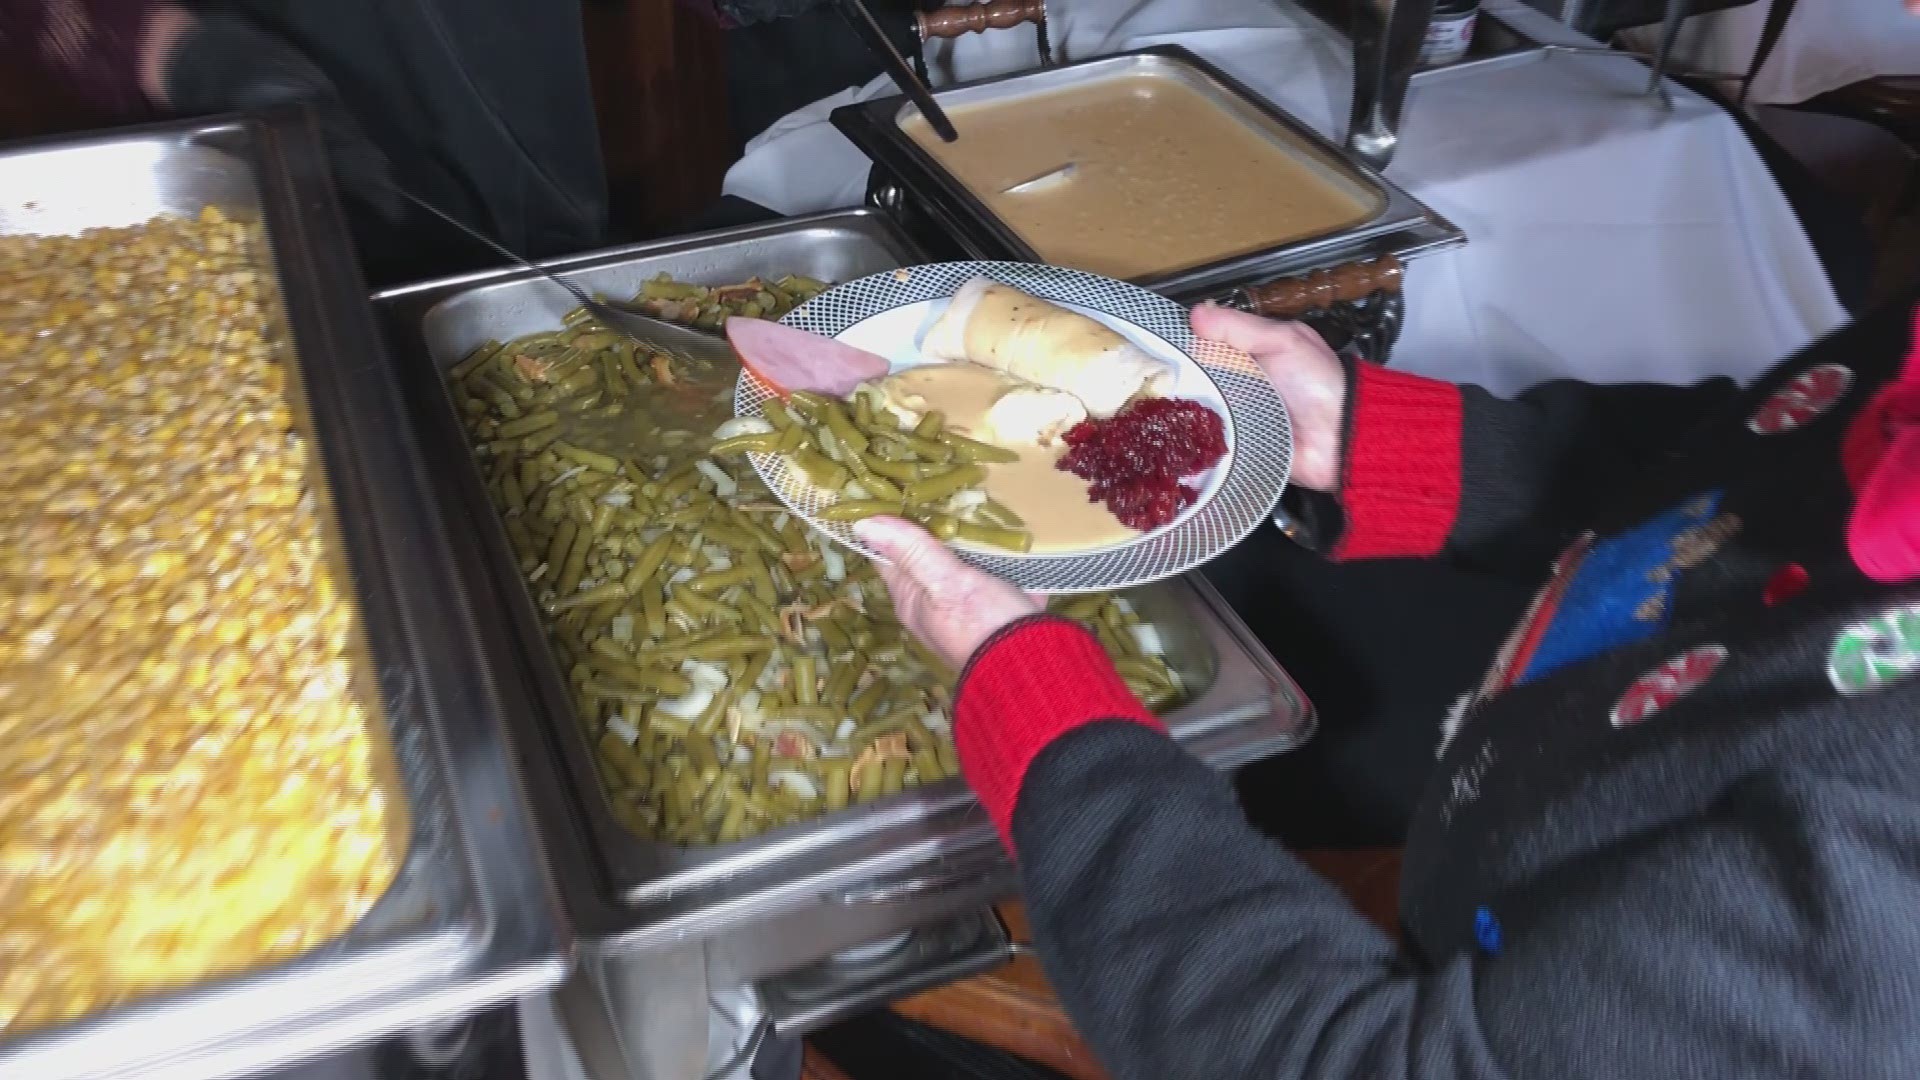 A local restaurant continues a long-standing tradition of feeding those less fortunate.